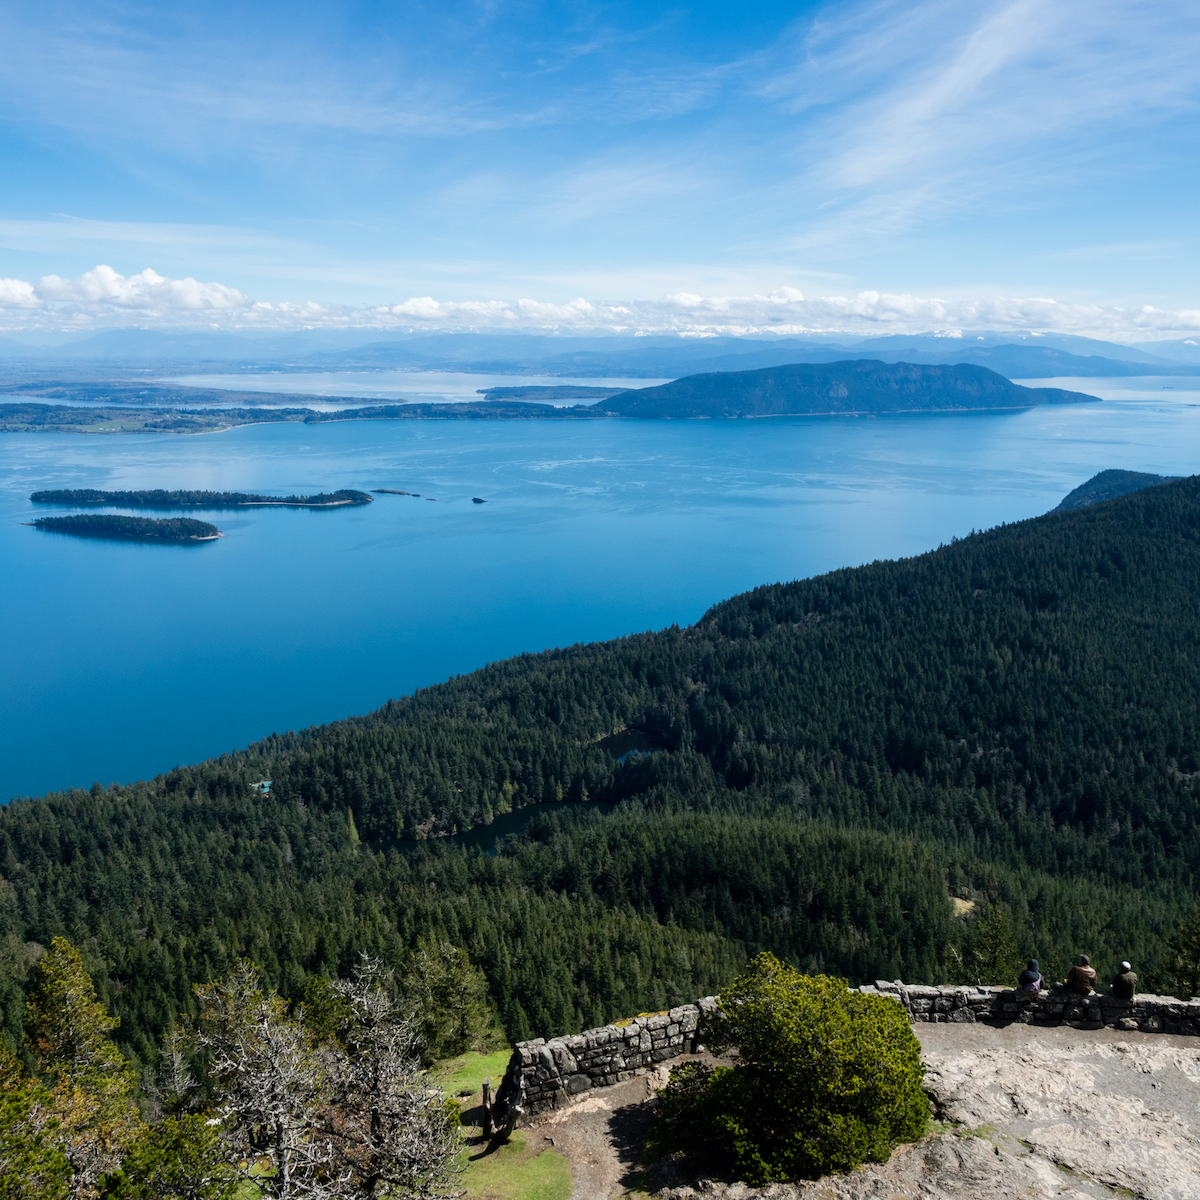 The Rosario Strait from Mount Constitution in Moran State Park, Washington